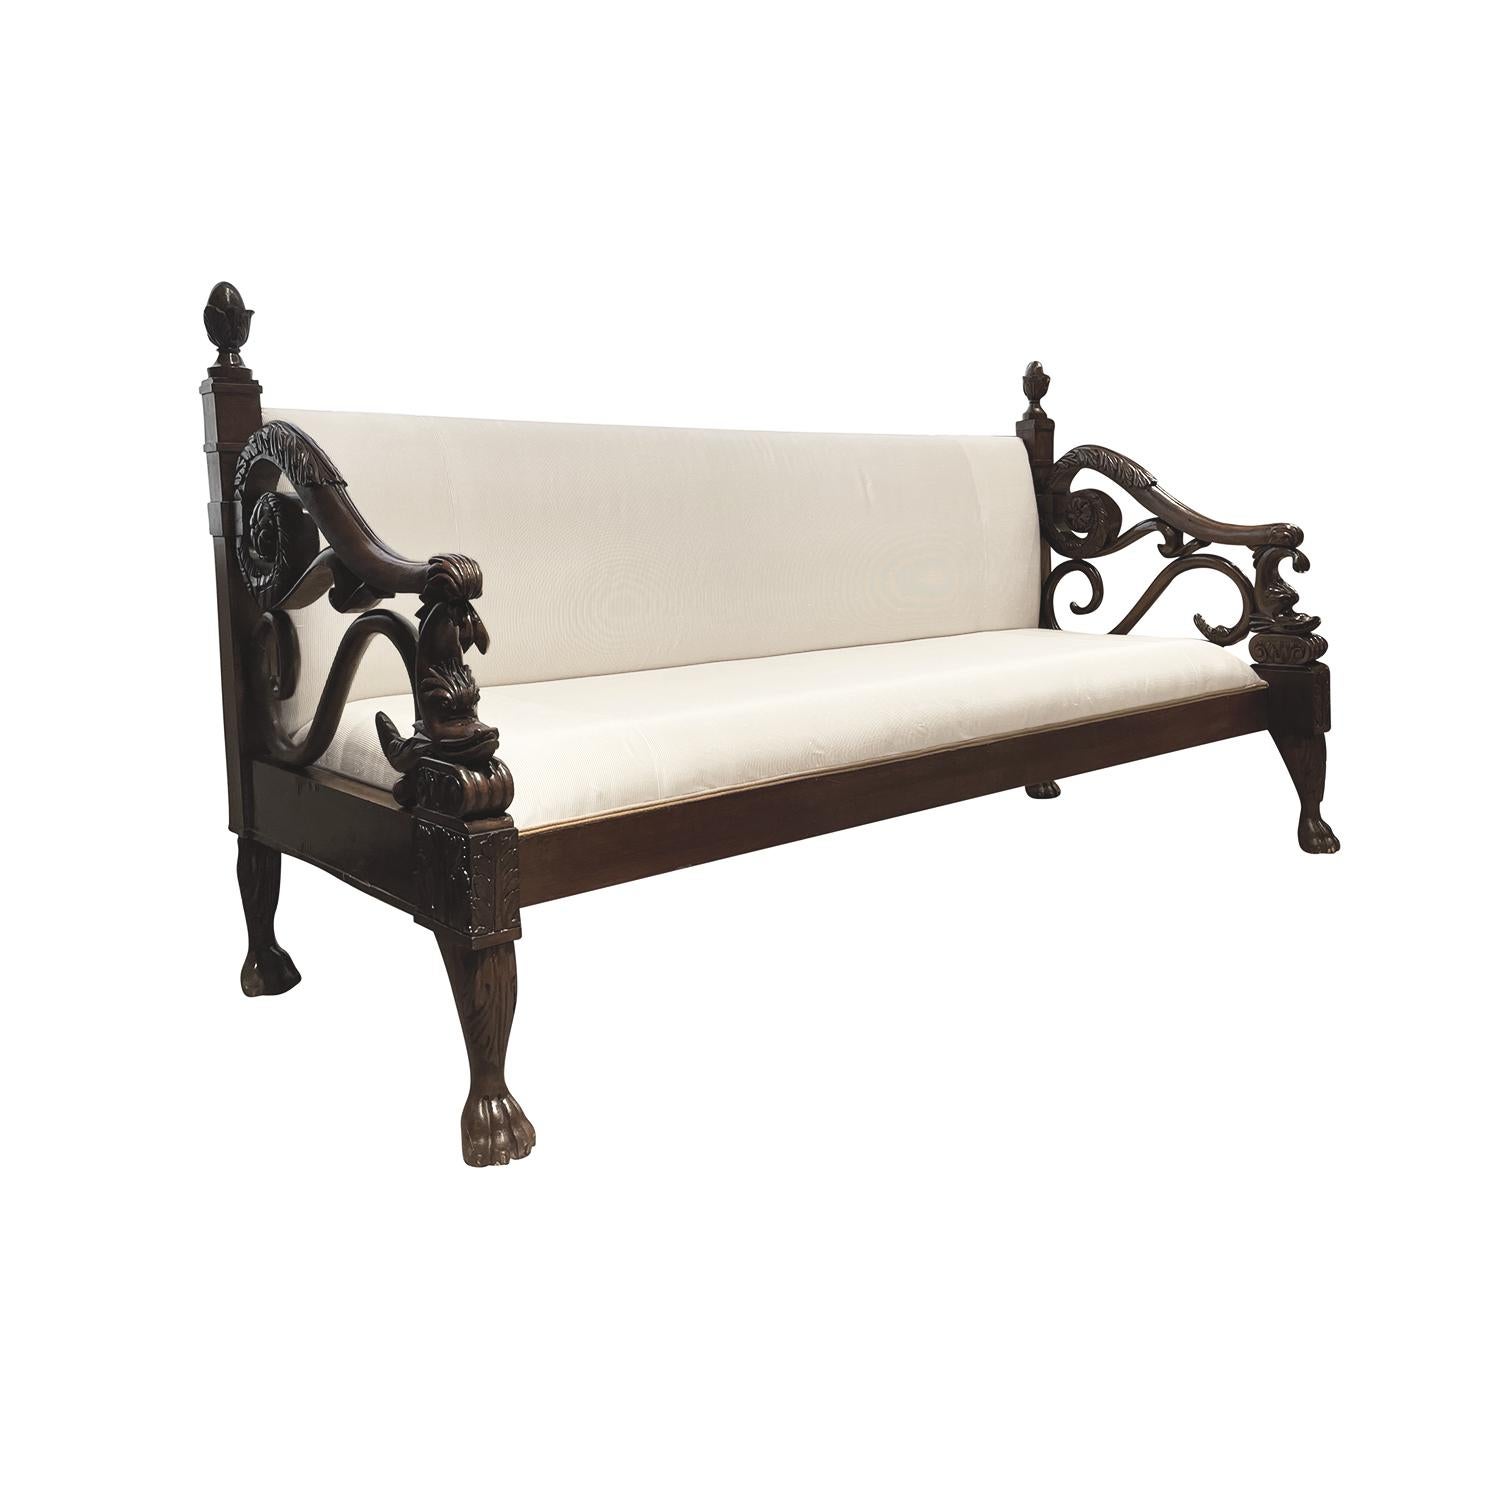 A dark-brown, antique Baltic long bench with two pillows made of hand carved Mahogany, in good condition. The three seater sofa, settee is standing on four paw feet with pinecones as pinnacles and elaborately carved armrests in the form of dolphins